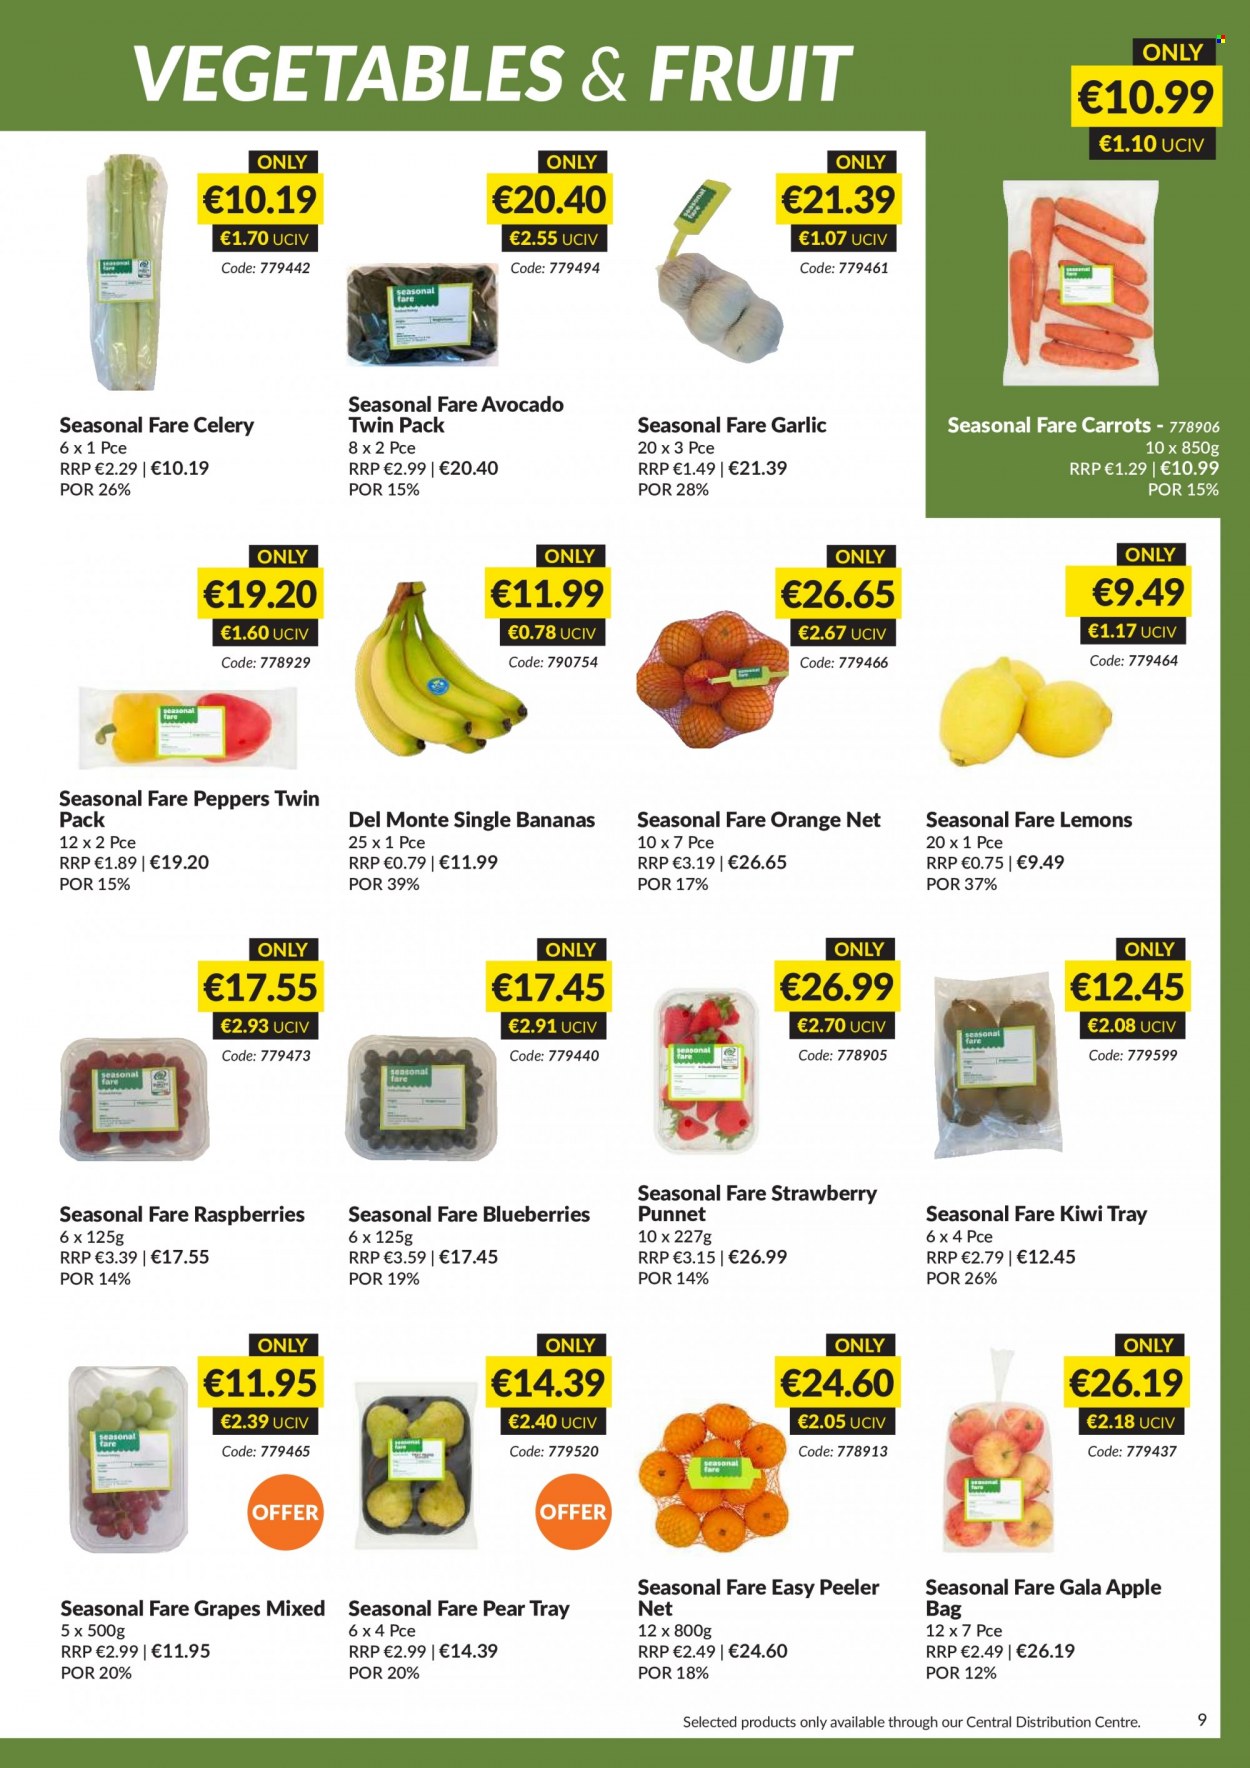 thumbnail - MUSGRAVE Market Place offer  - 25.09.2022 - 22.10.2022 - Sales products - carrots, celery, garlic, peppers, avocado, bananas, blueberries, Gala, grapes, kiwi, pears, oranges, lemons, Del Monte, tray, peeler. Page 9.